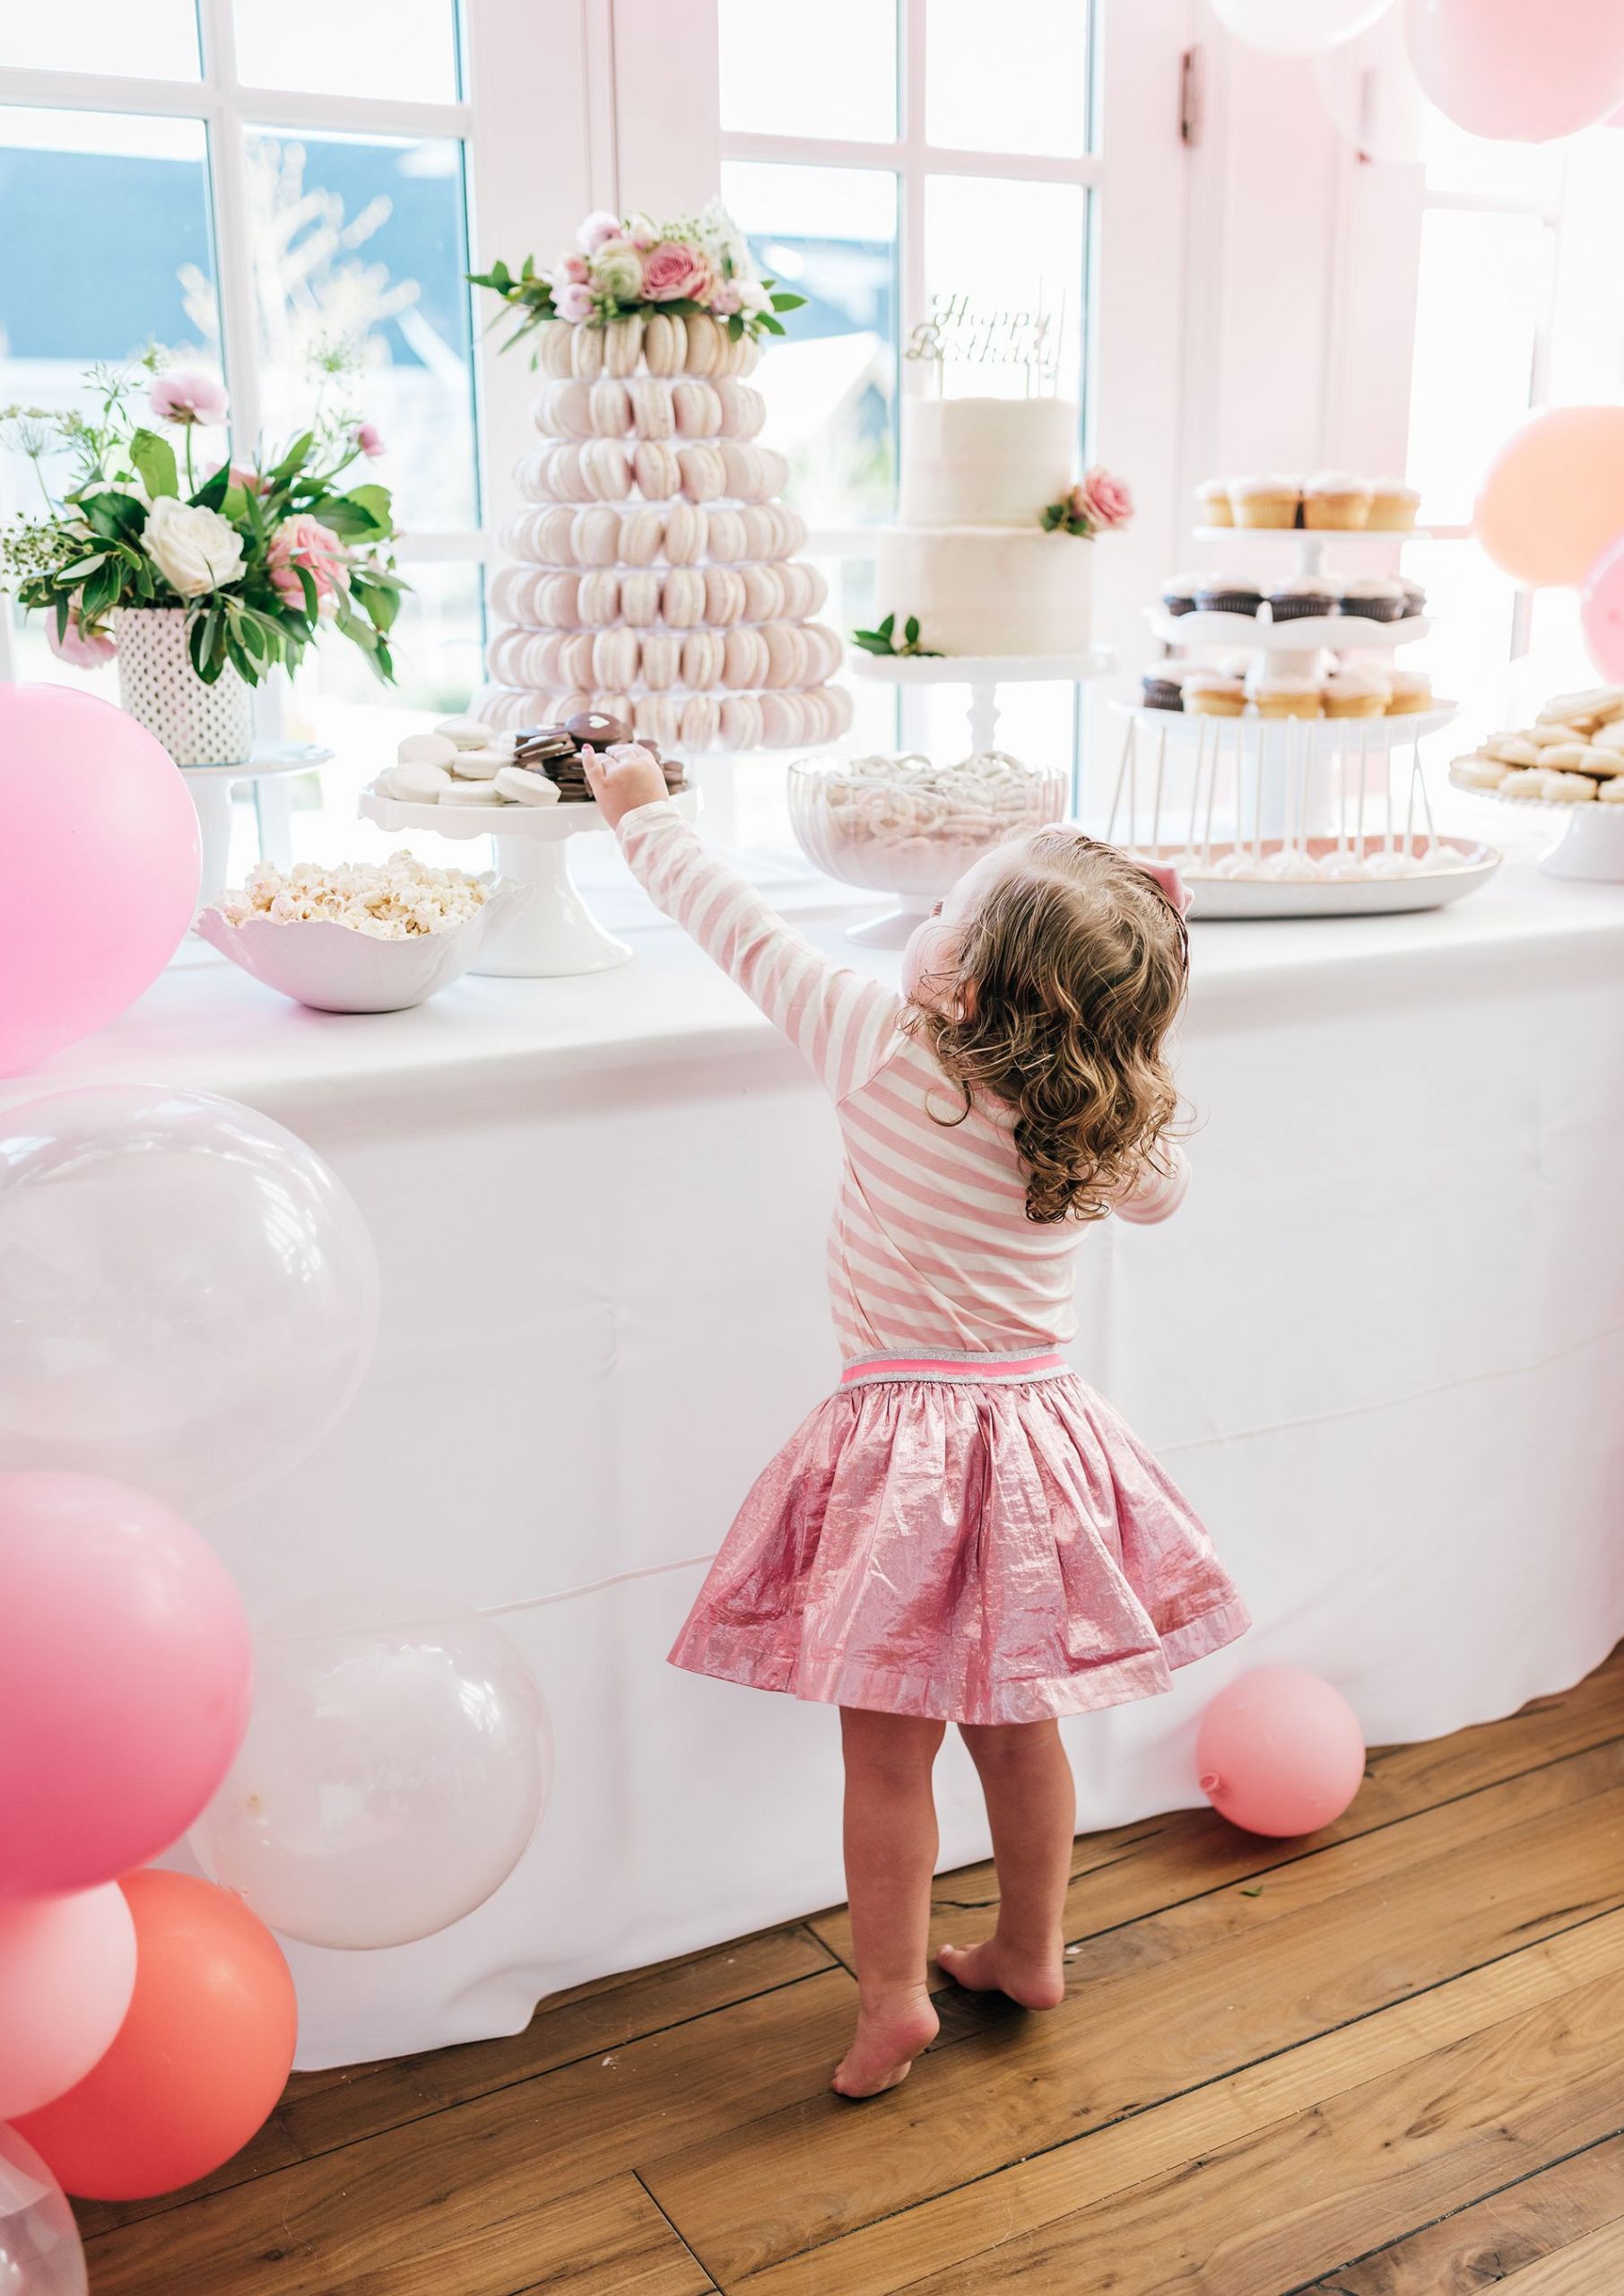 Birthday Party Ideas For 2 Year Old Baby Girl
 We re So Jealous This Two Year Old s Birthday Party